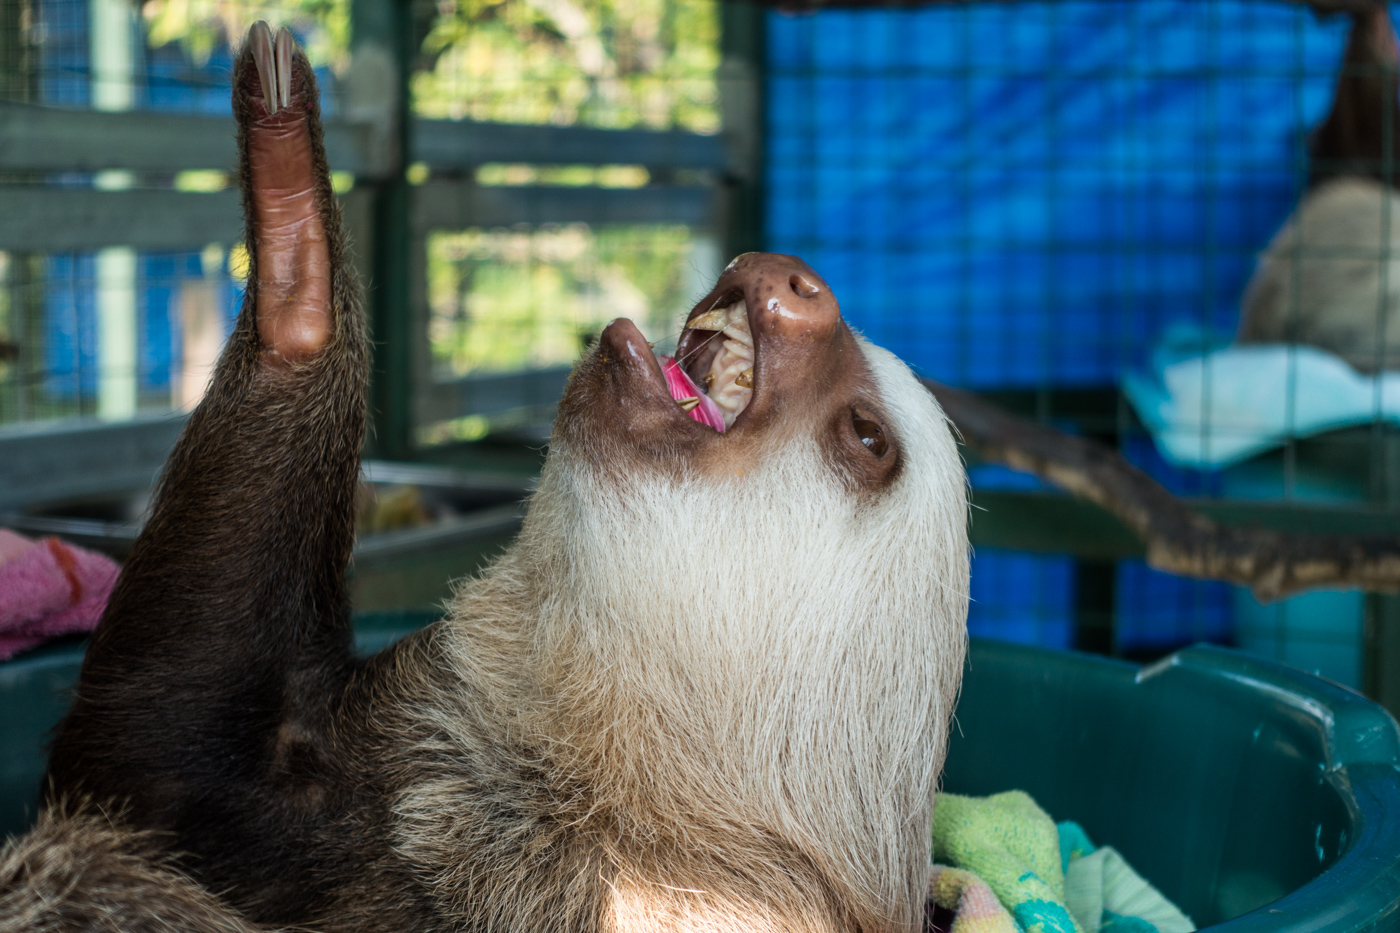 Stella the sloth eating a hibiscus flower